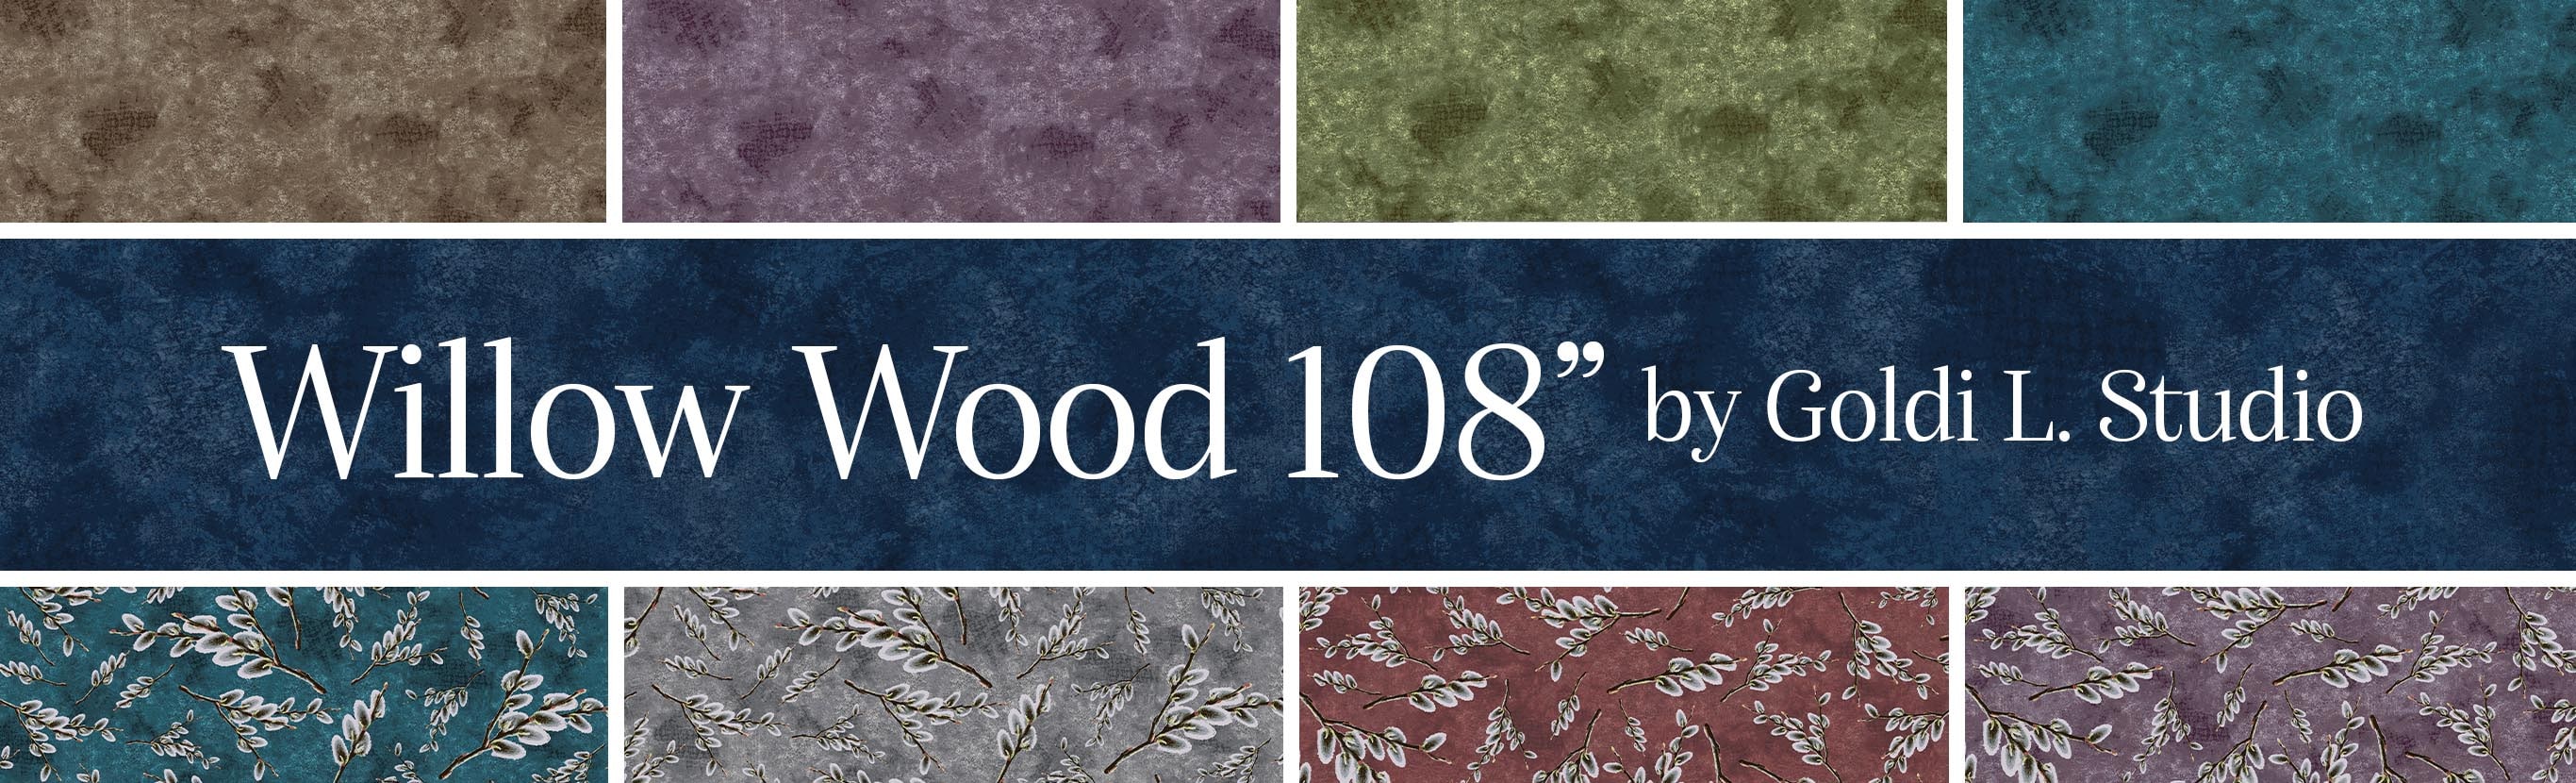 Willow Wood 108